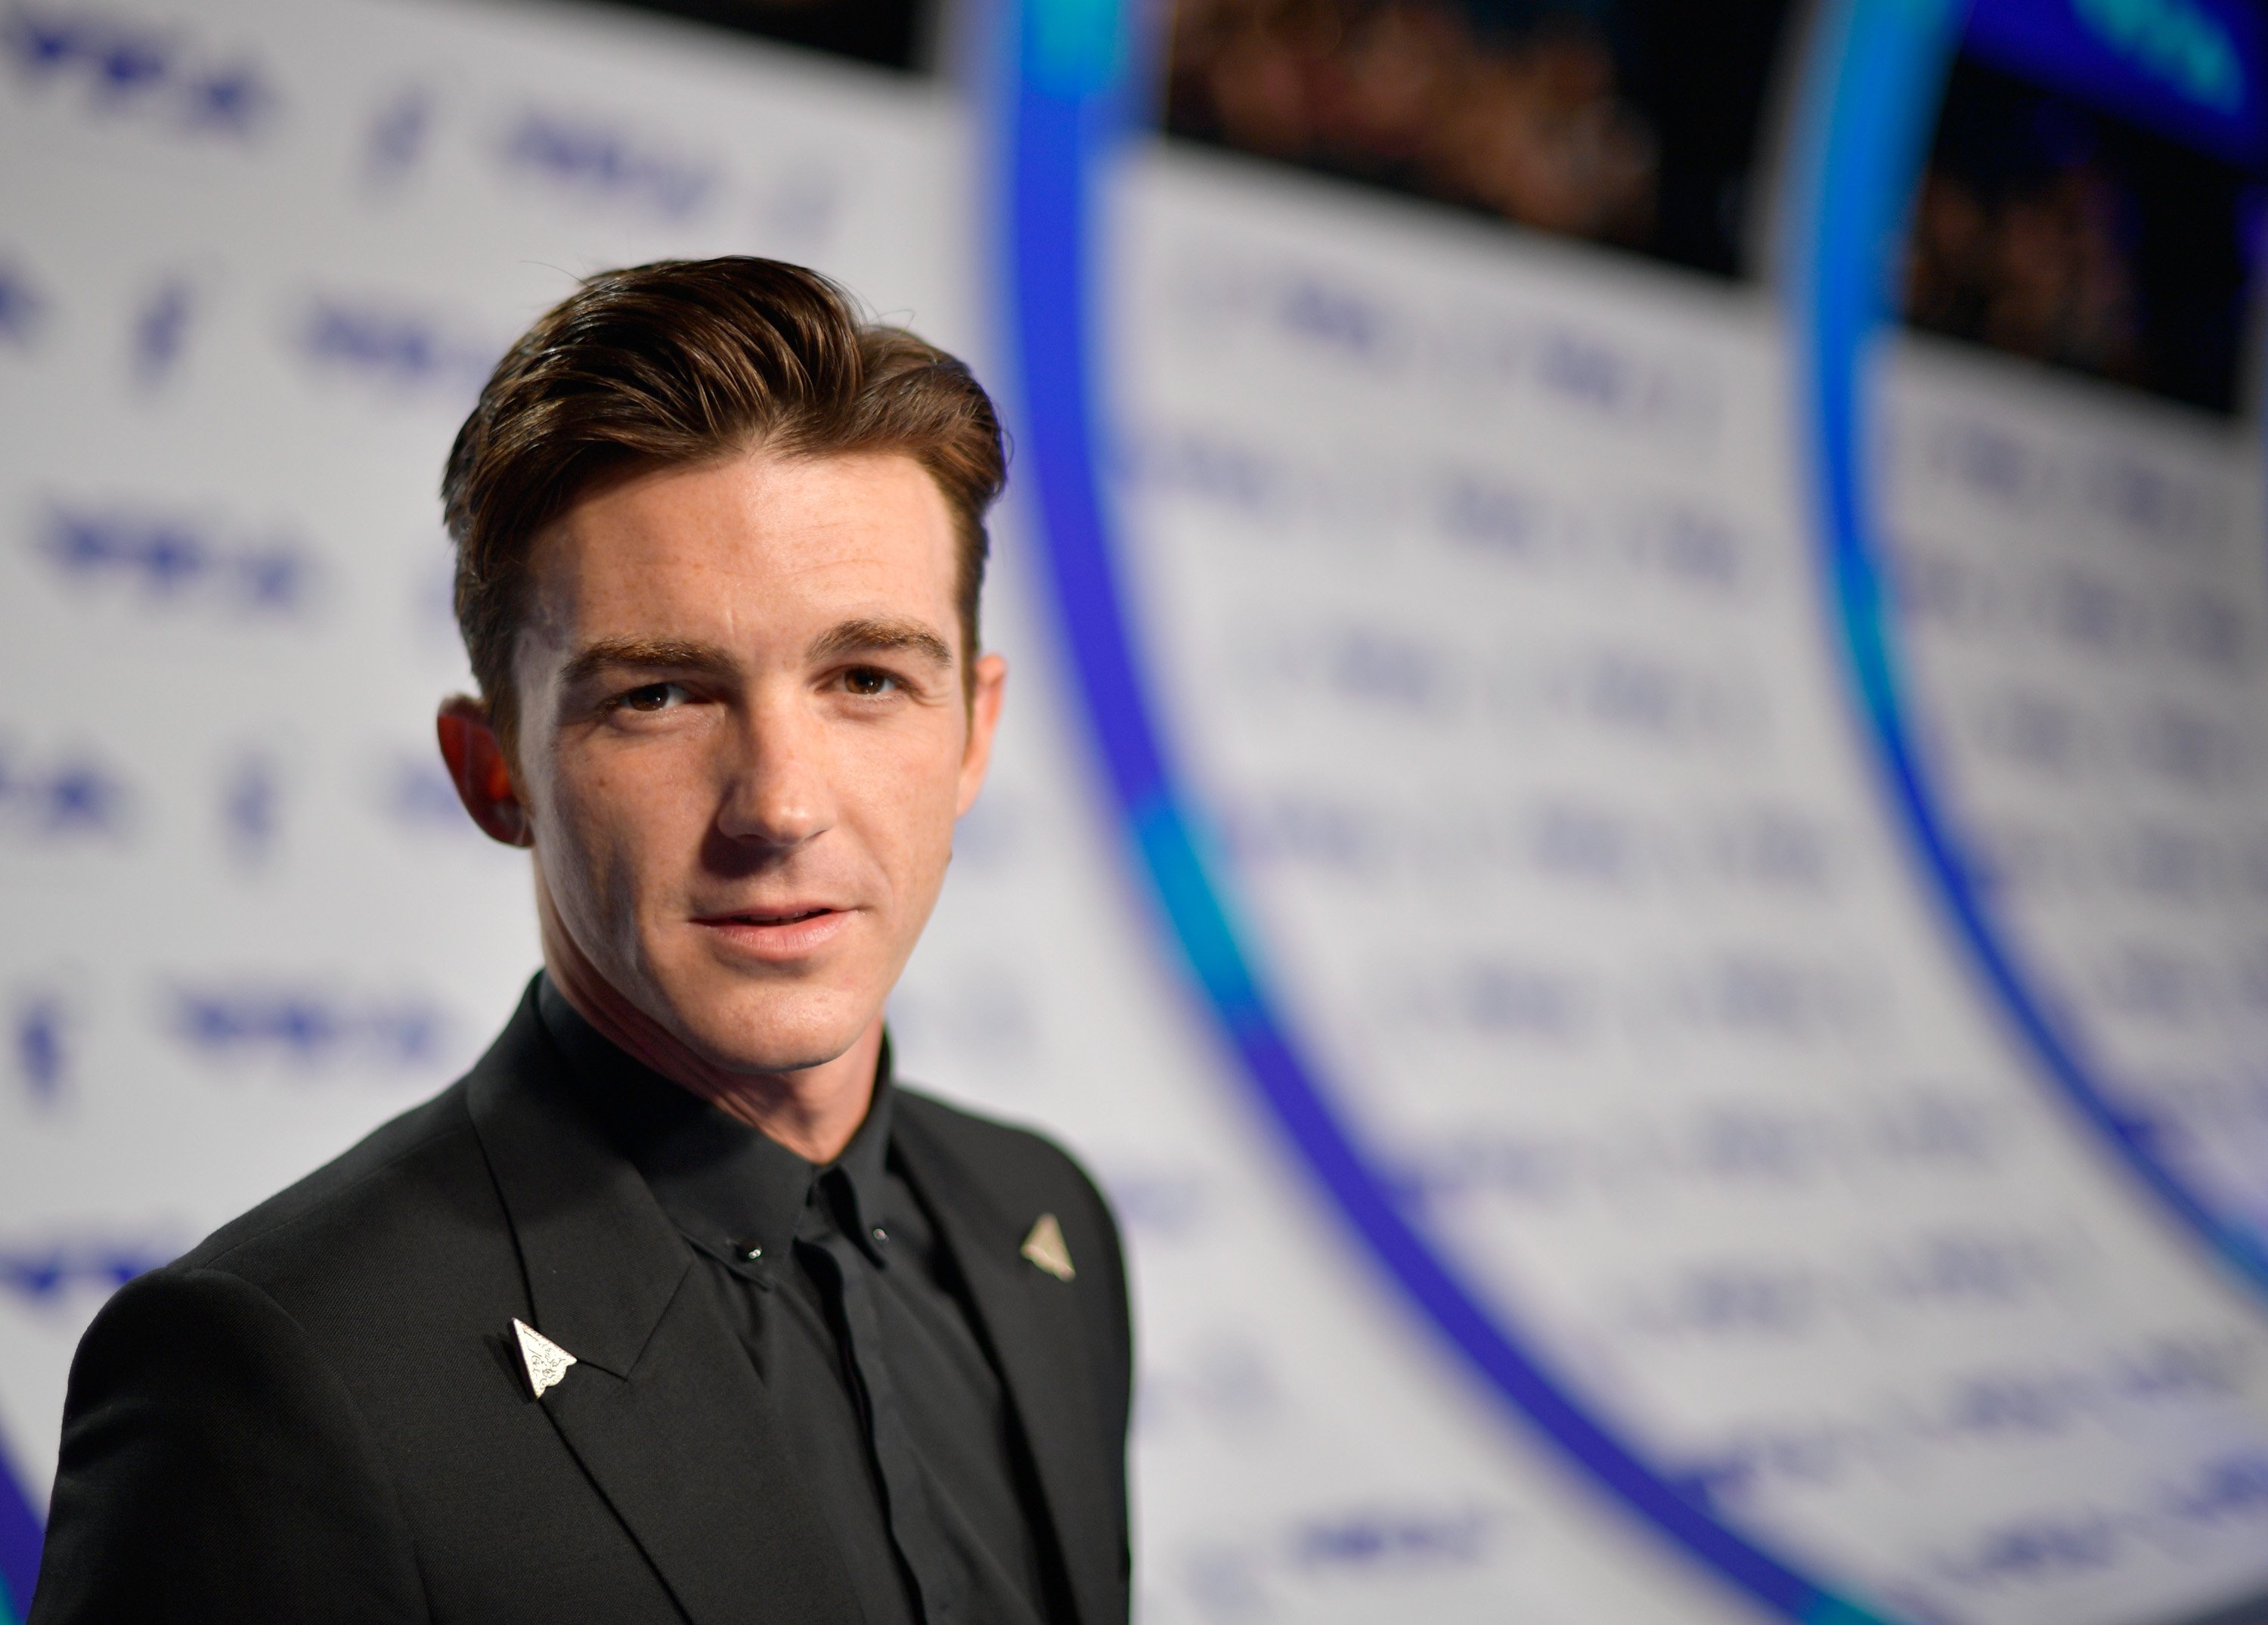 Drake Bell attends the 2017 MTV Video Music Awards at The Forum on August 27, 2017 in Inglewood, California. | Photo: GettyImages